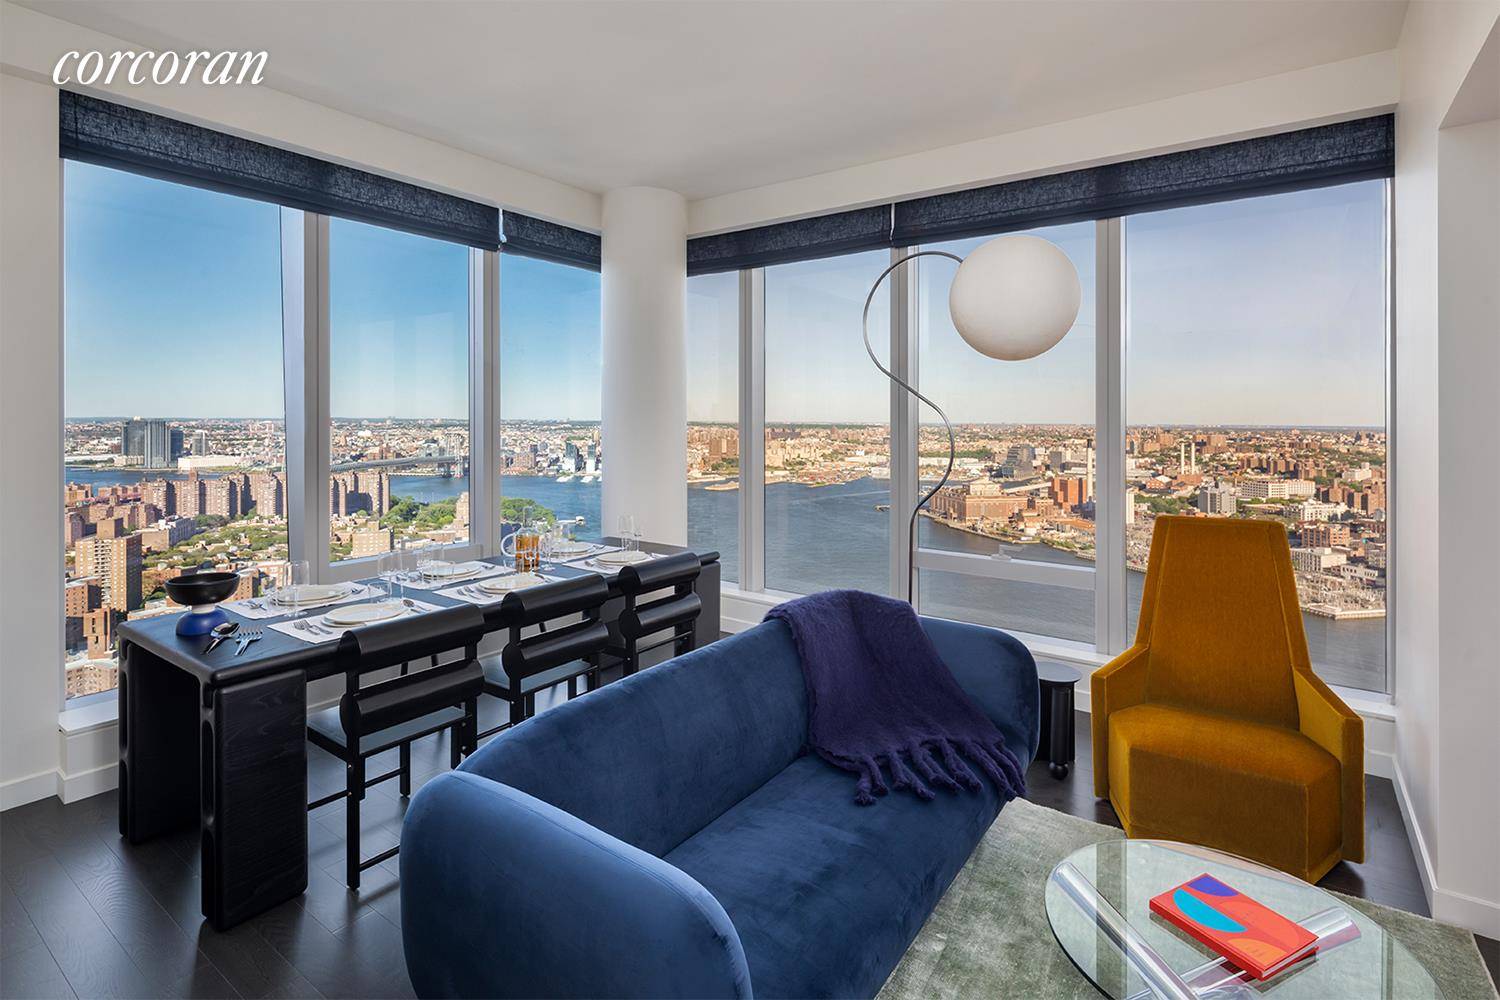 ONE MANHATTAN SQUARE OFFERS ONE OF THE LAST 20 YEAR TAX ABATEMENTS AVAILABLE IN NEW YORK CITY Residence 11E is a 1123 square foot two bedroom, two bathroom, with an ...